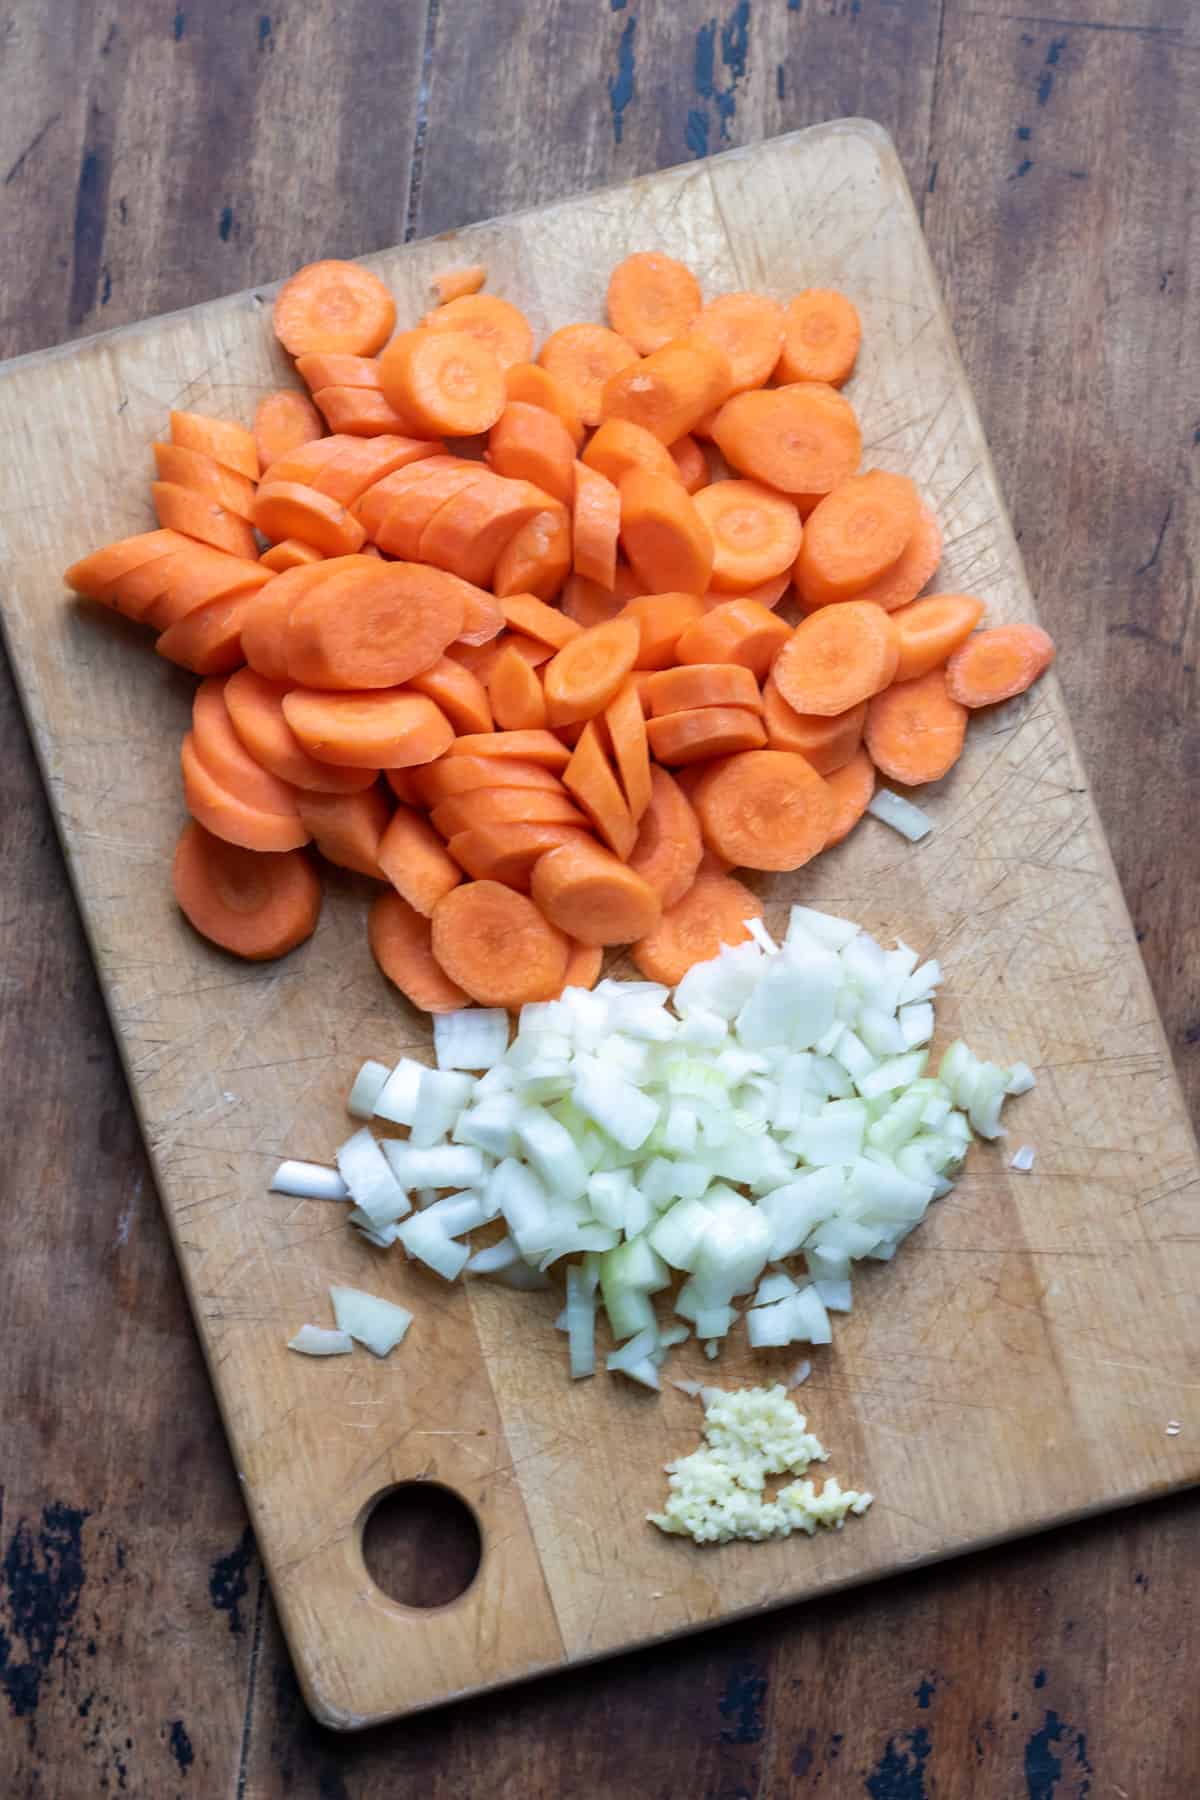 A cutting board with carrots and onions.